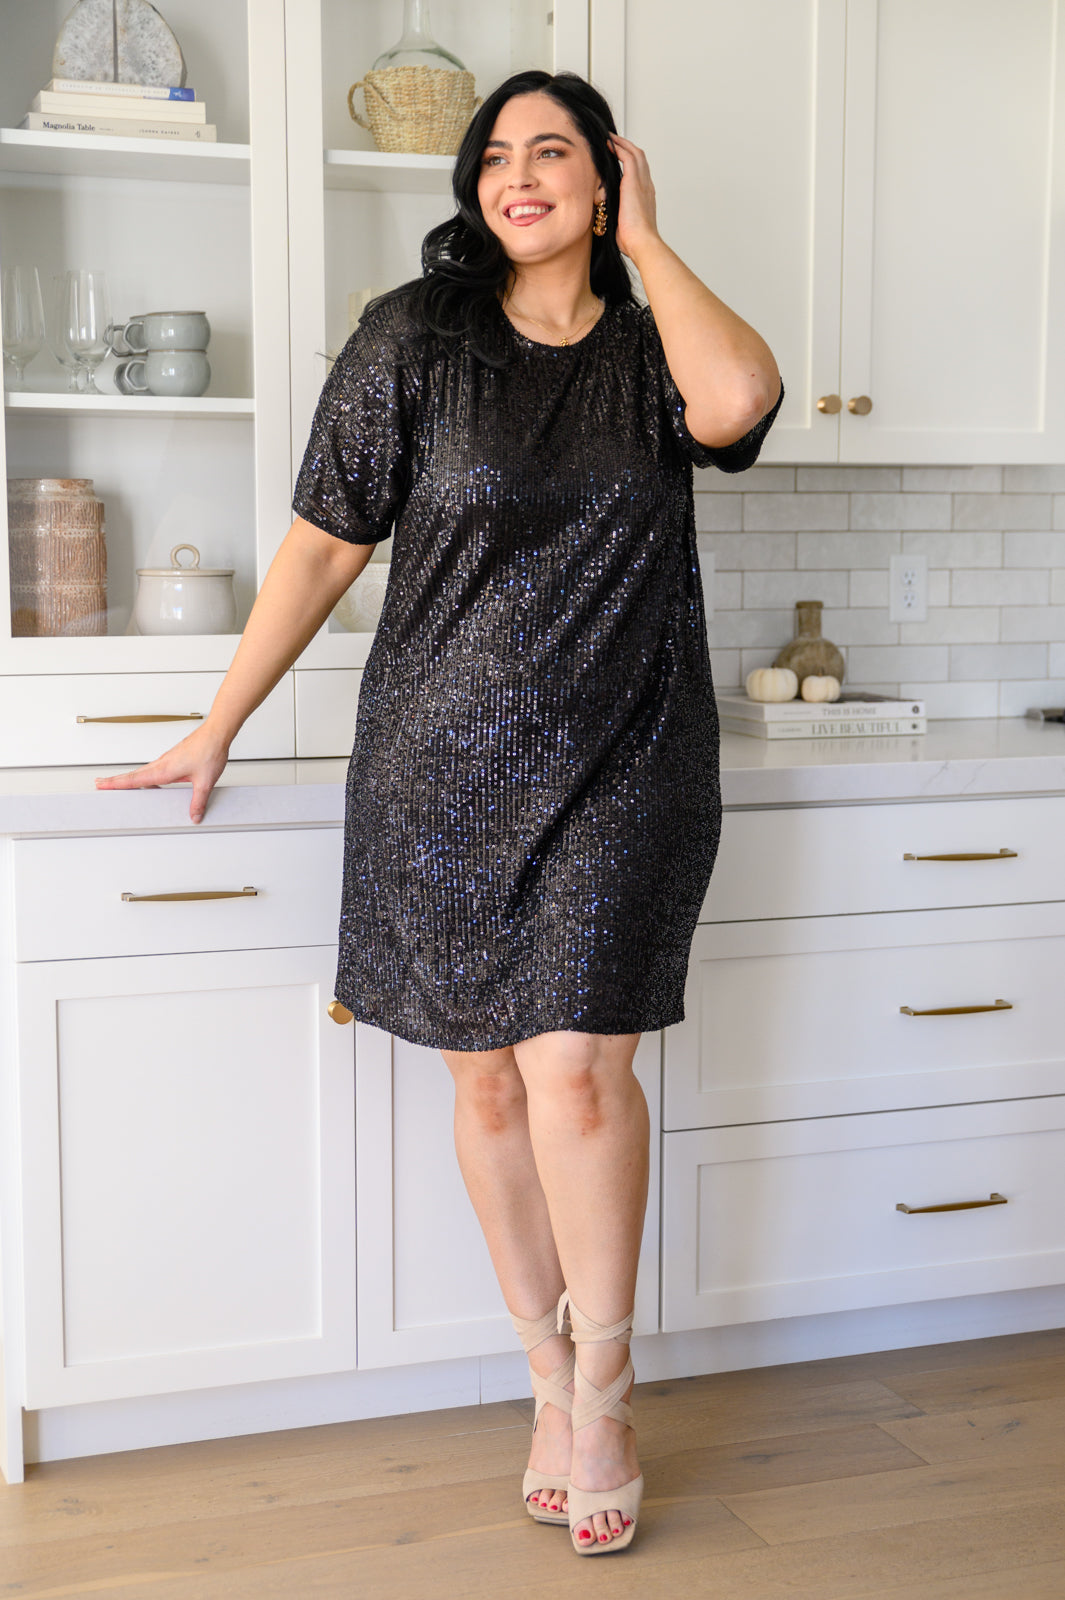 City and Sparkle Short Sleeve Sequin Shift Dress in Black Black 1XL 